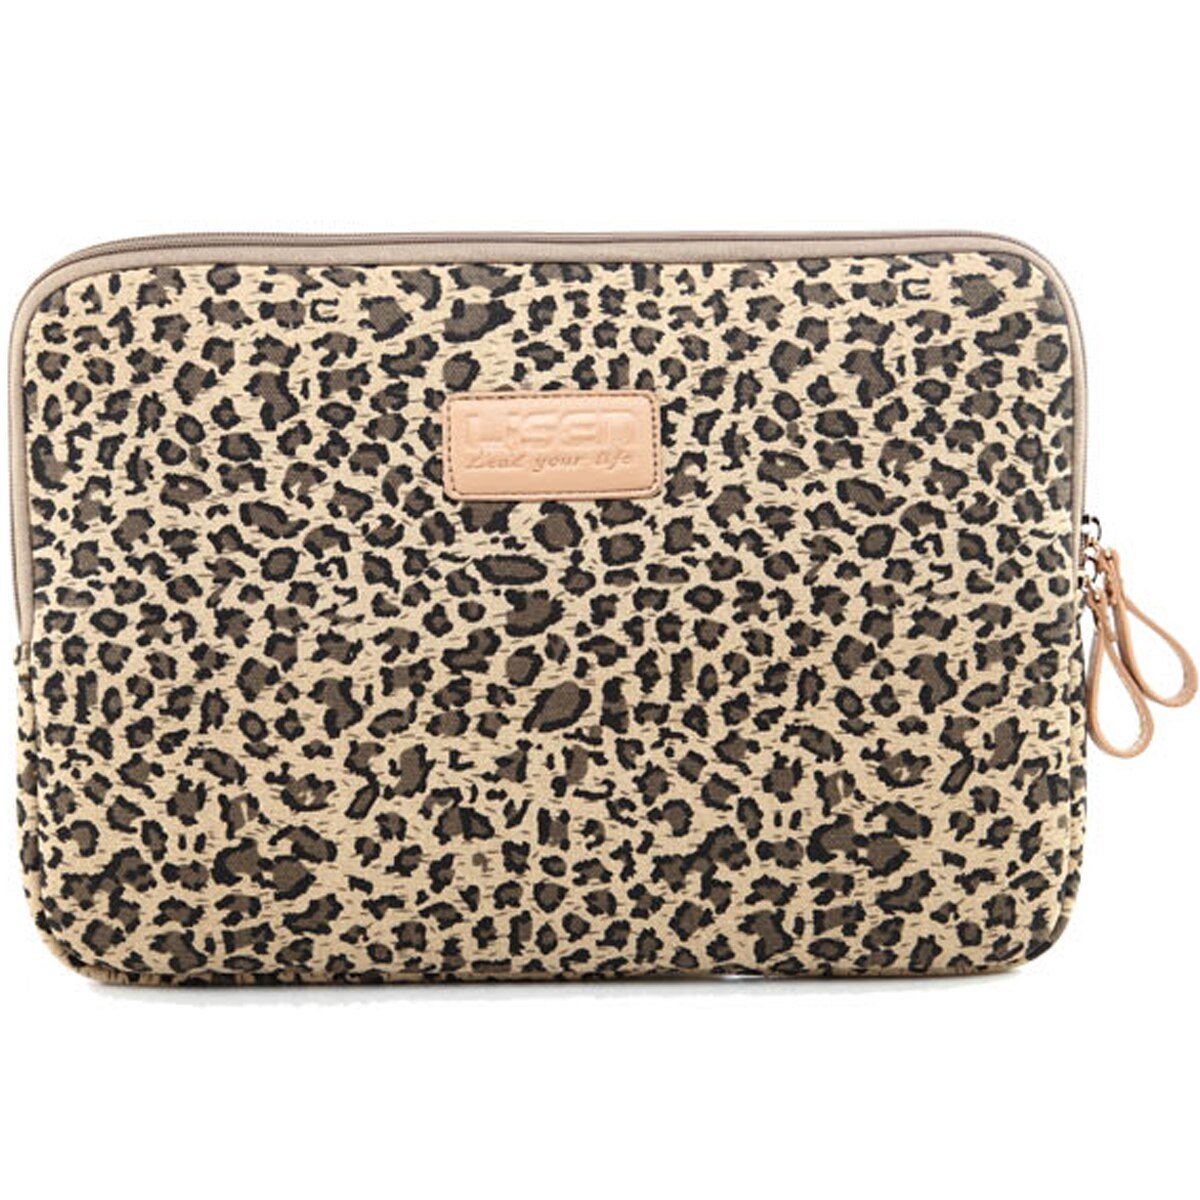 13shockproof leopard pouch handbag Liner Sleeve Case for Macbook air 13 14 15 15.4 Cover for Retina Pro 13.3